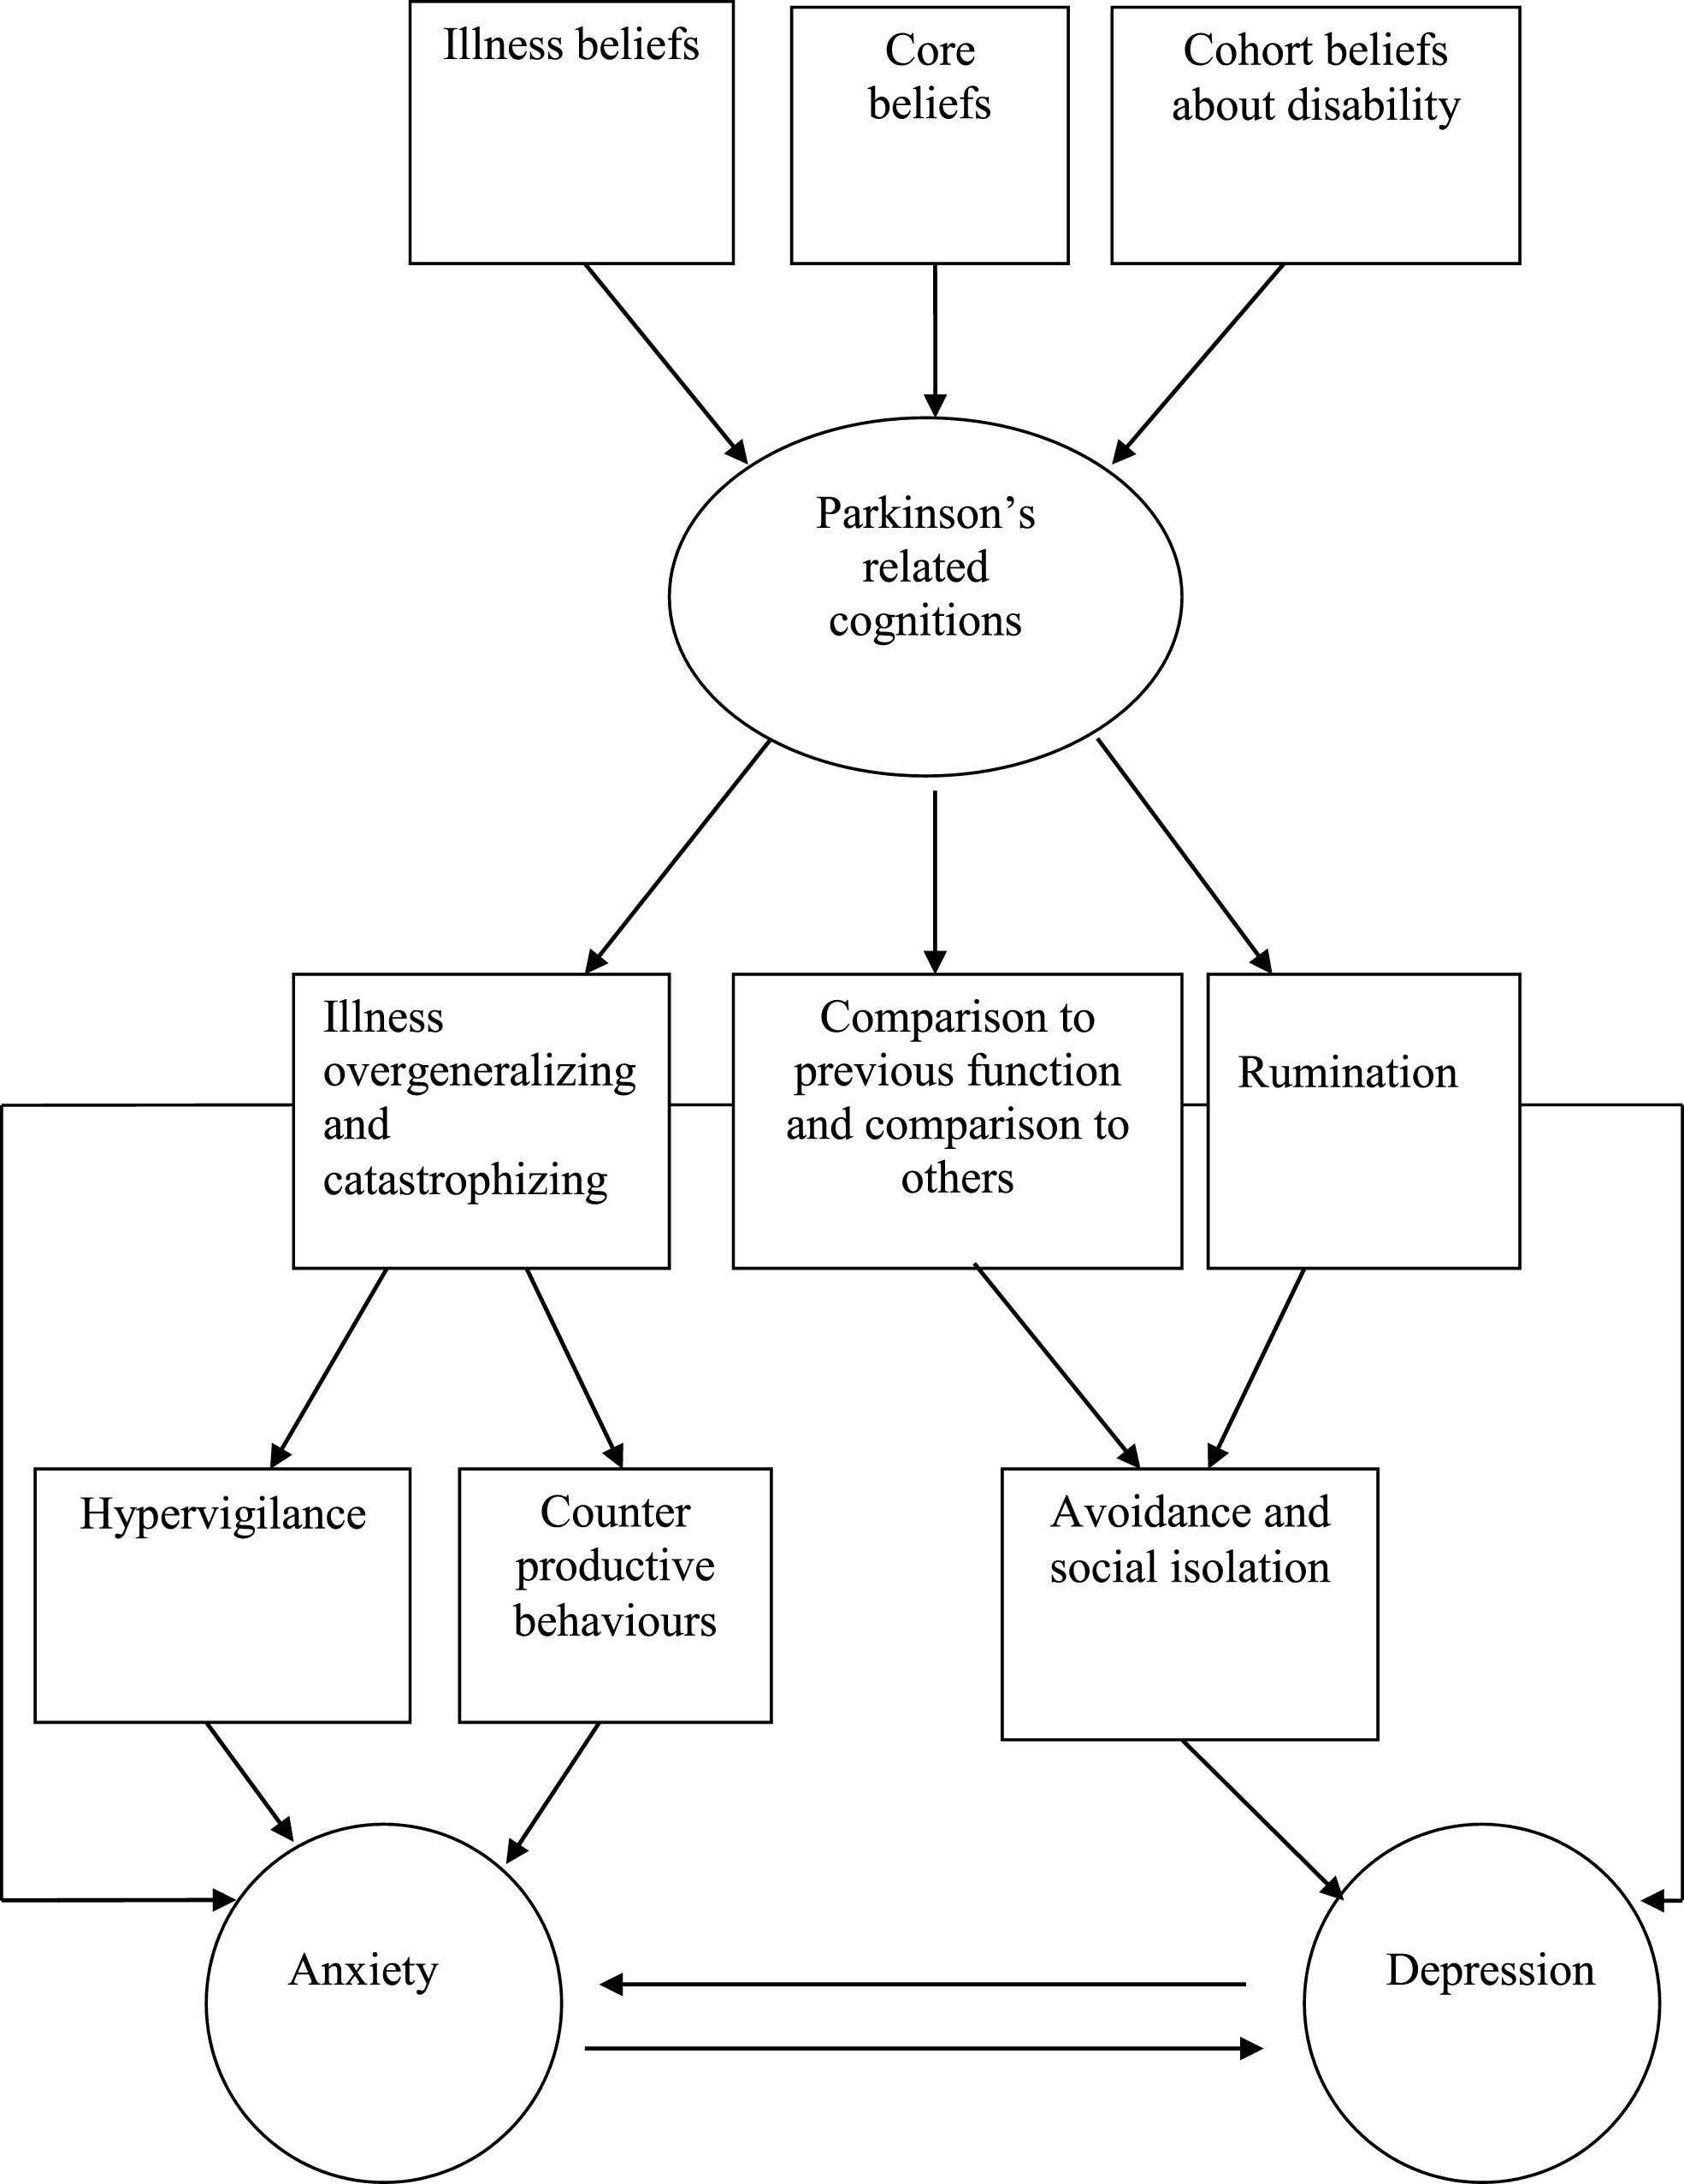 A cognitive behavioral model of the development and maintenance of depression and anxiety in Parkinson’s disease.